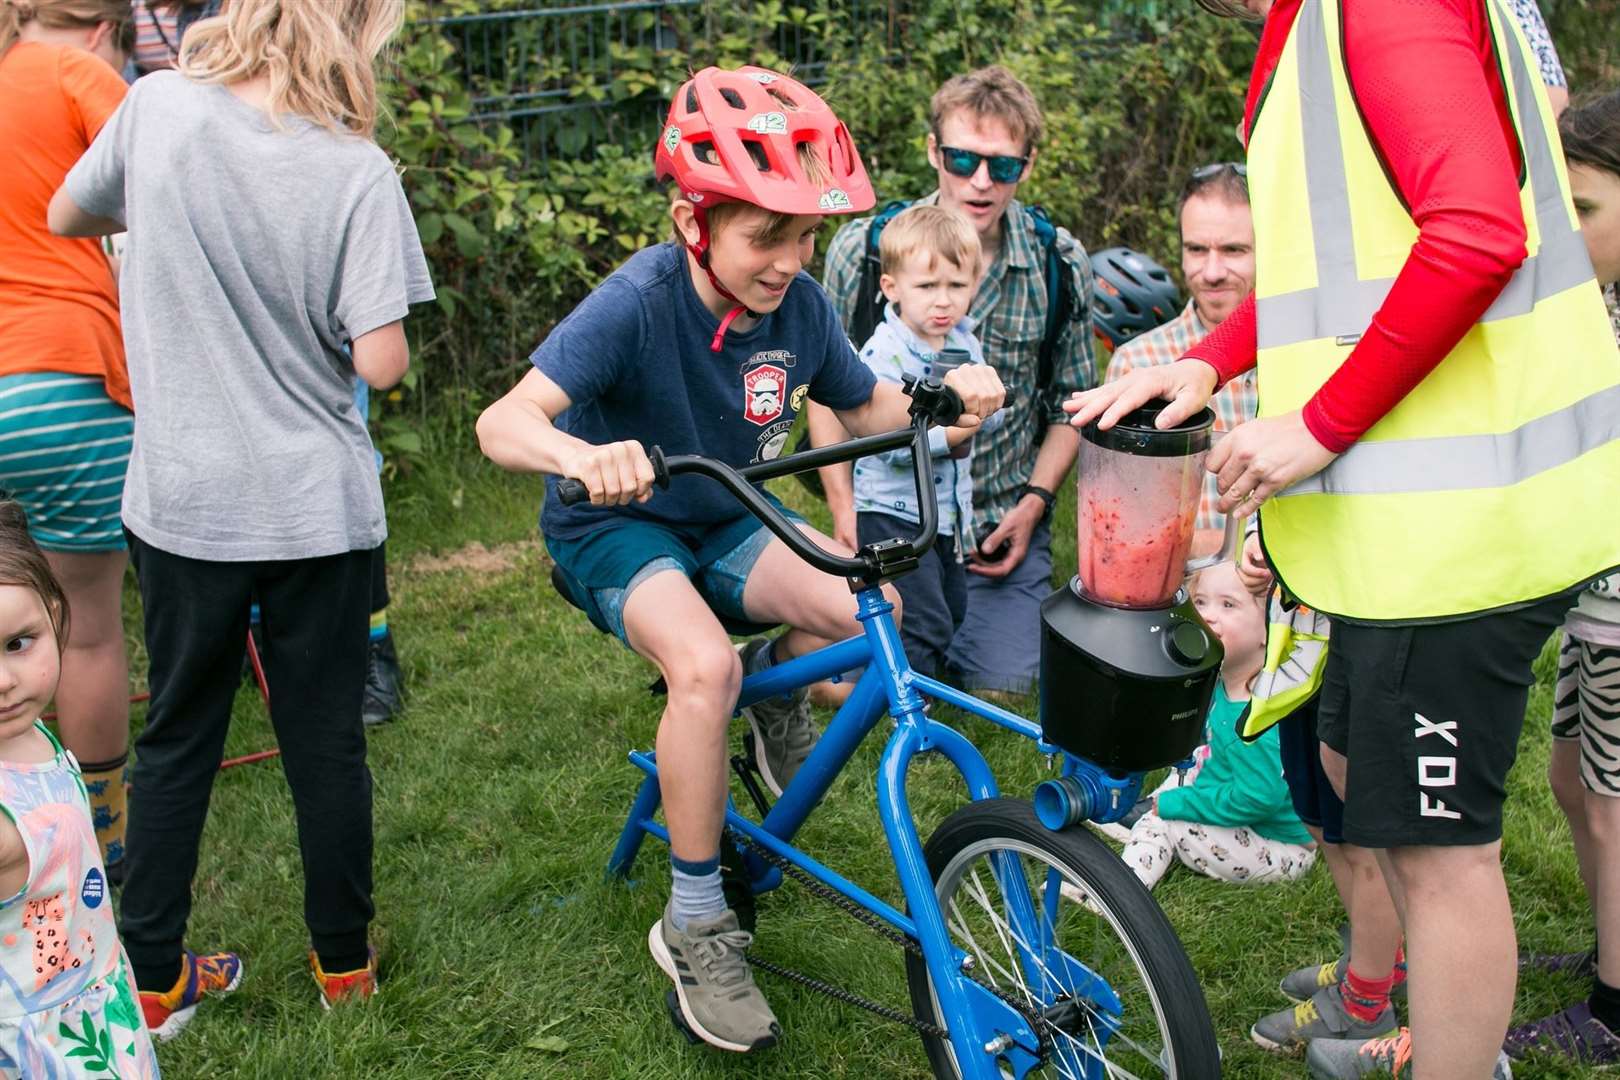 The smoothie bike was a popular attraction at the finish. Picture: Katie Noble